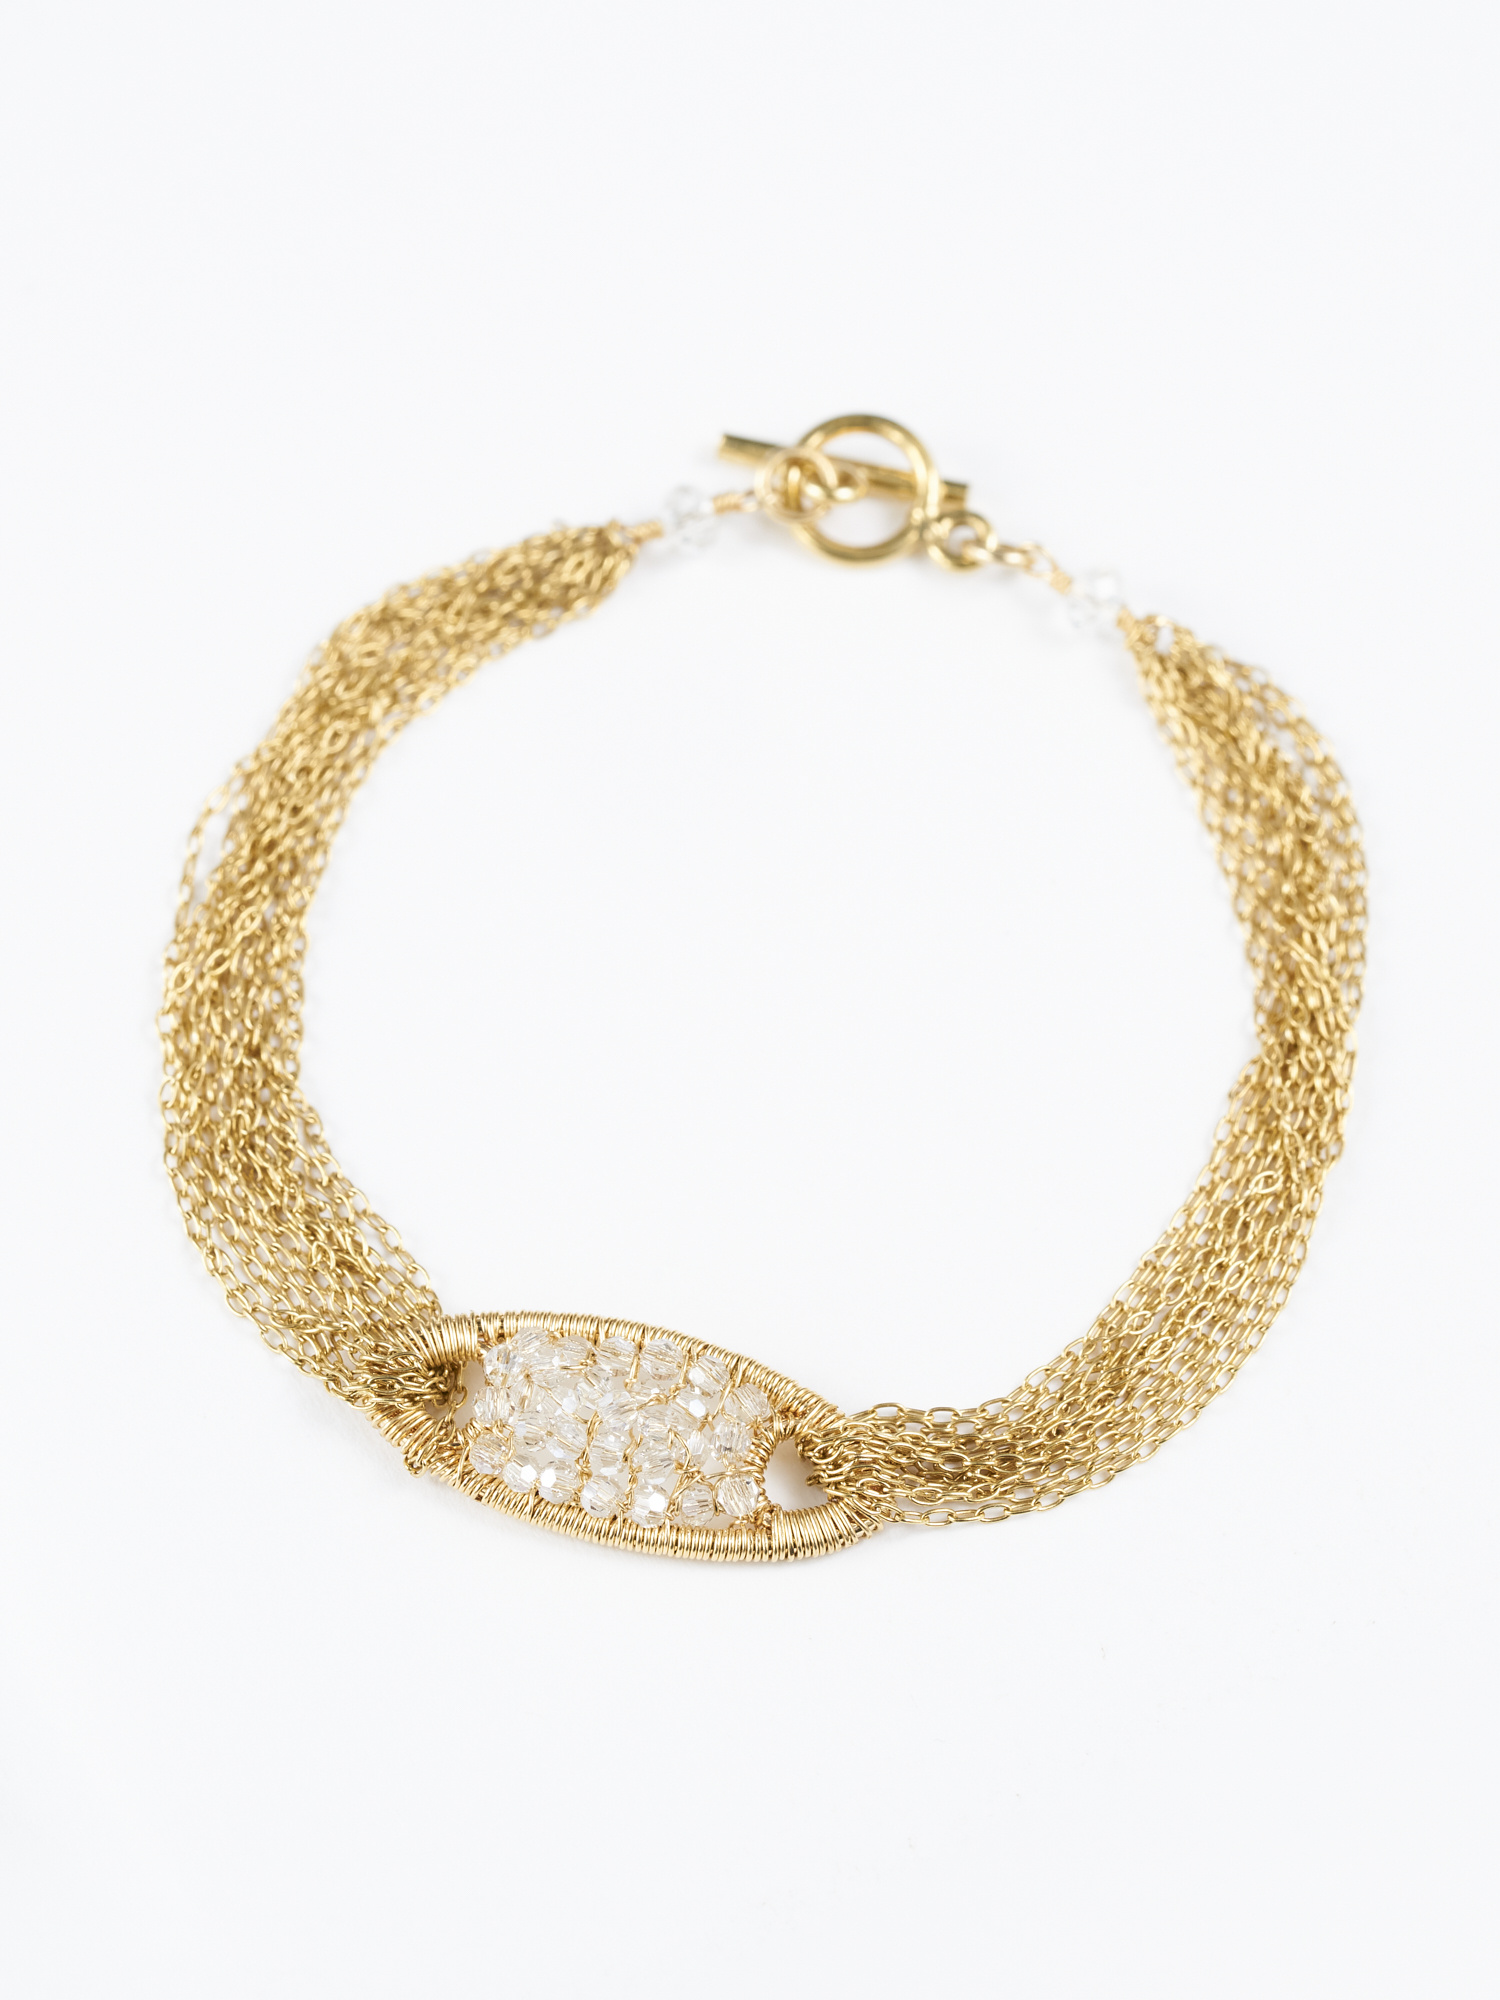 Dresses for Every Occasion  Gold bracelet for girl, Gold jewelry